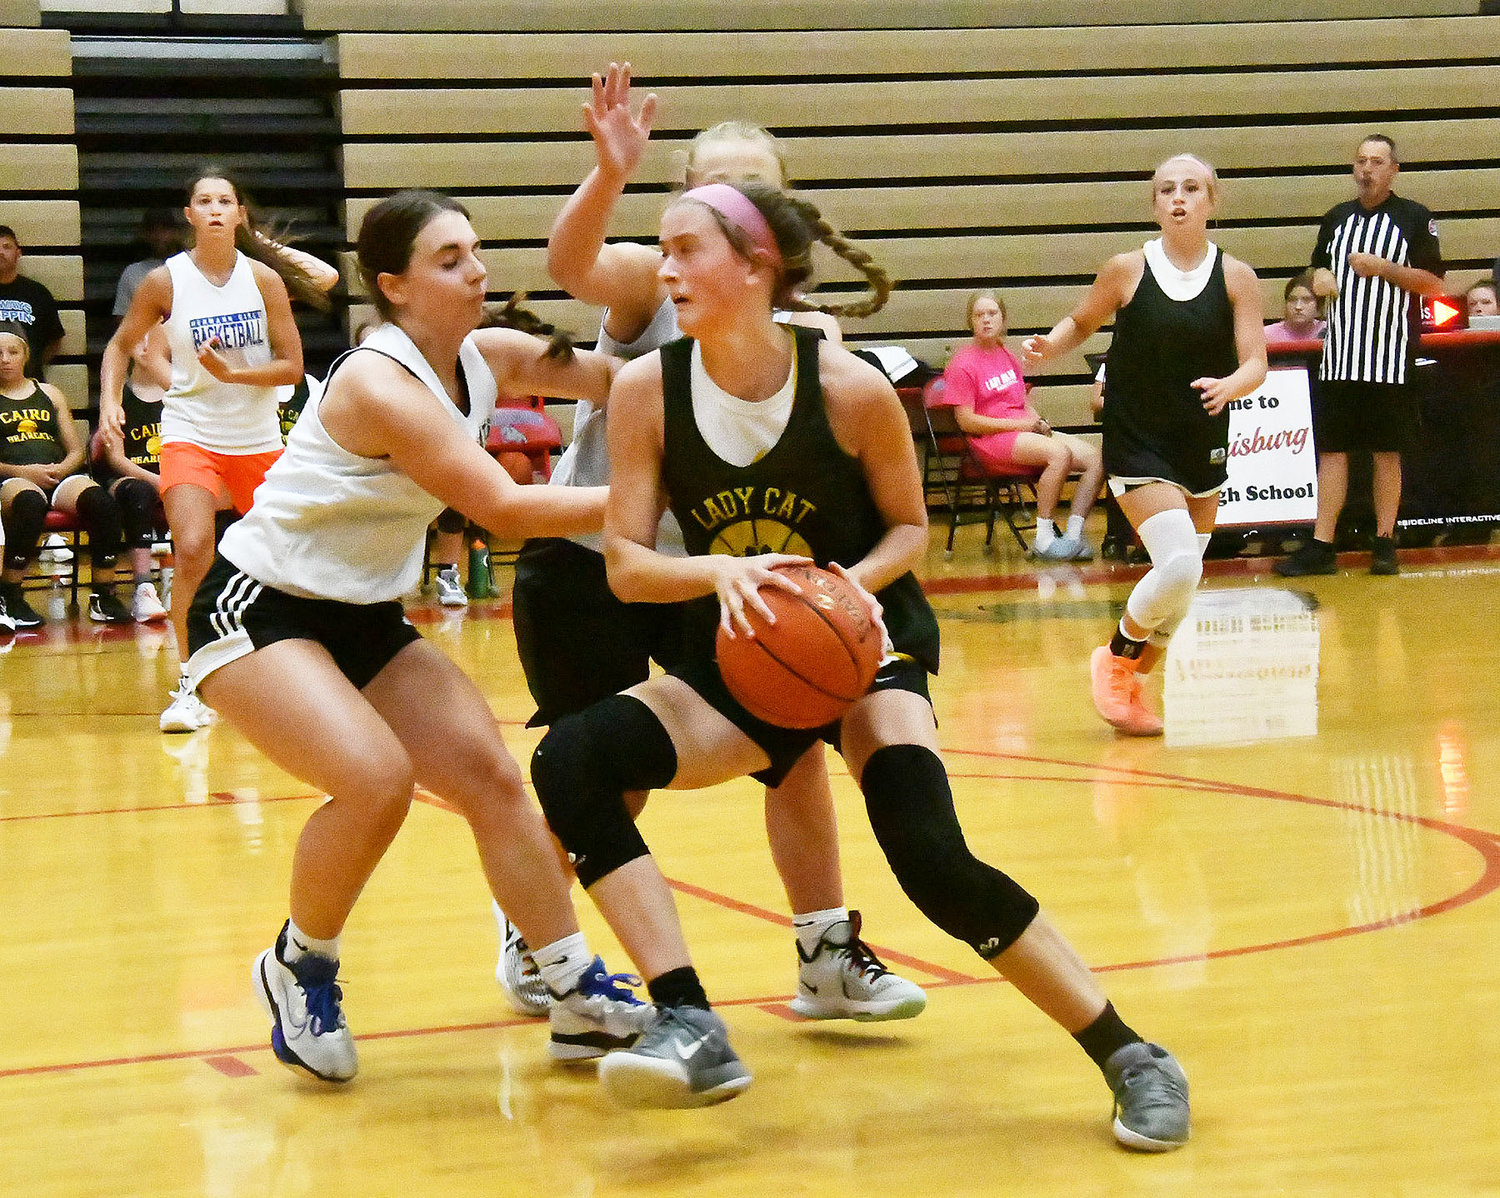 Cairo's Jersey Bailey deals with double-team defense from Hermann during Tuesday's scrimmage at Harrisburg High School.